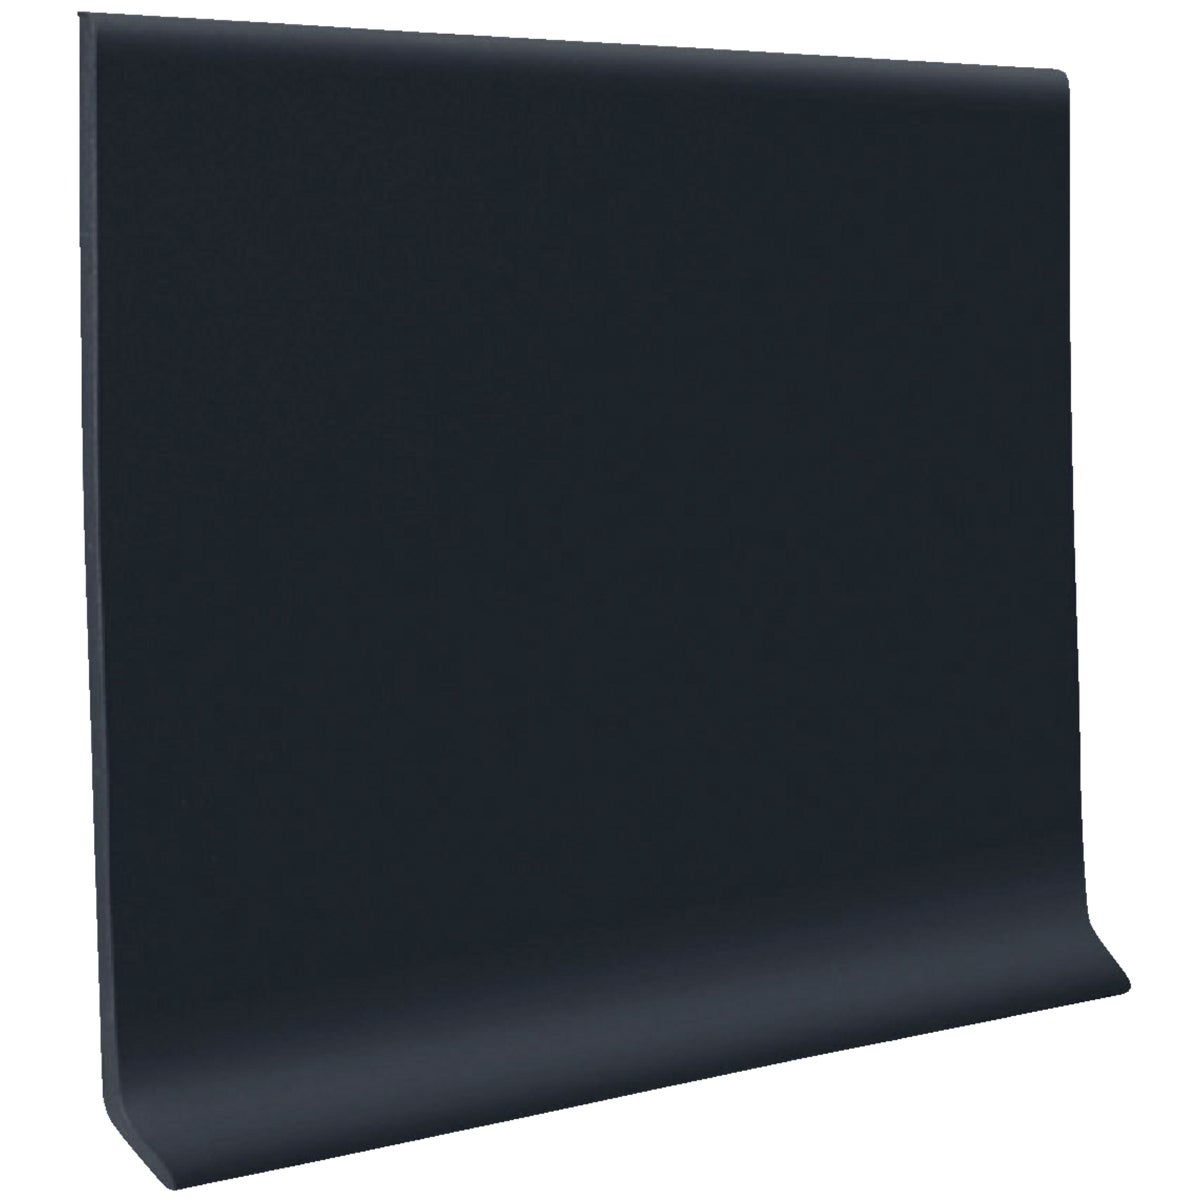 Roppe 2-1/2 In. x 4 Ft. Black Vinyl Dryback Wall Cove Base